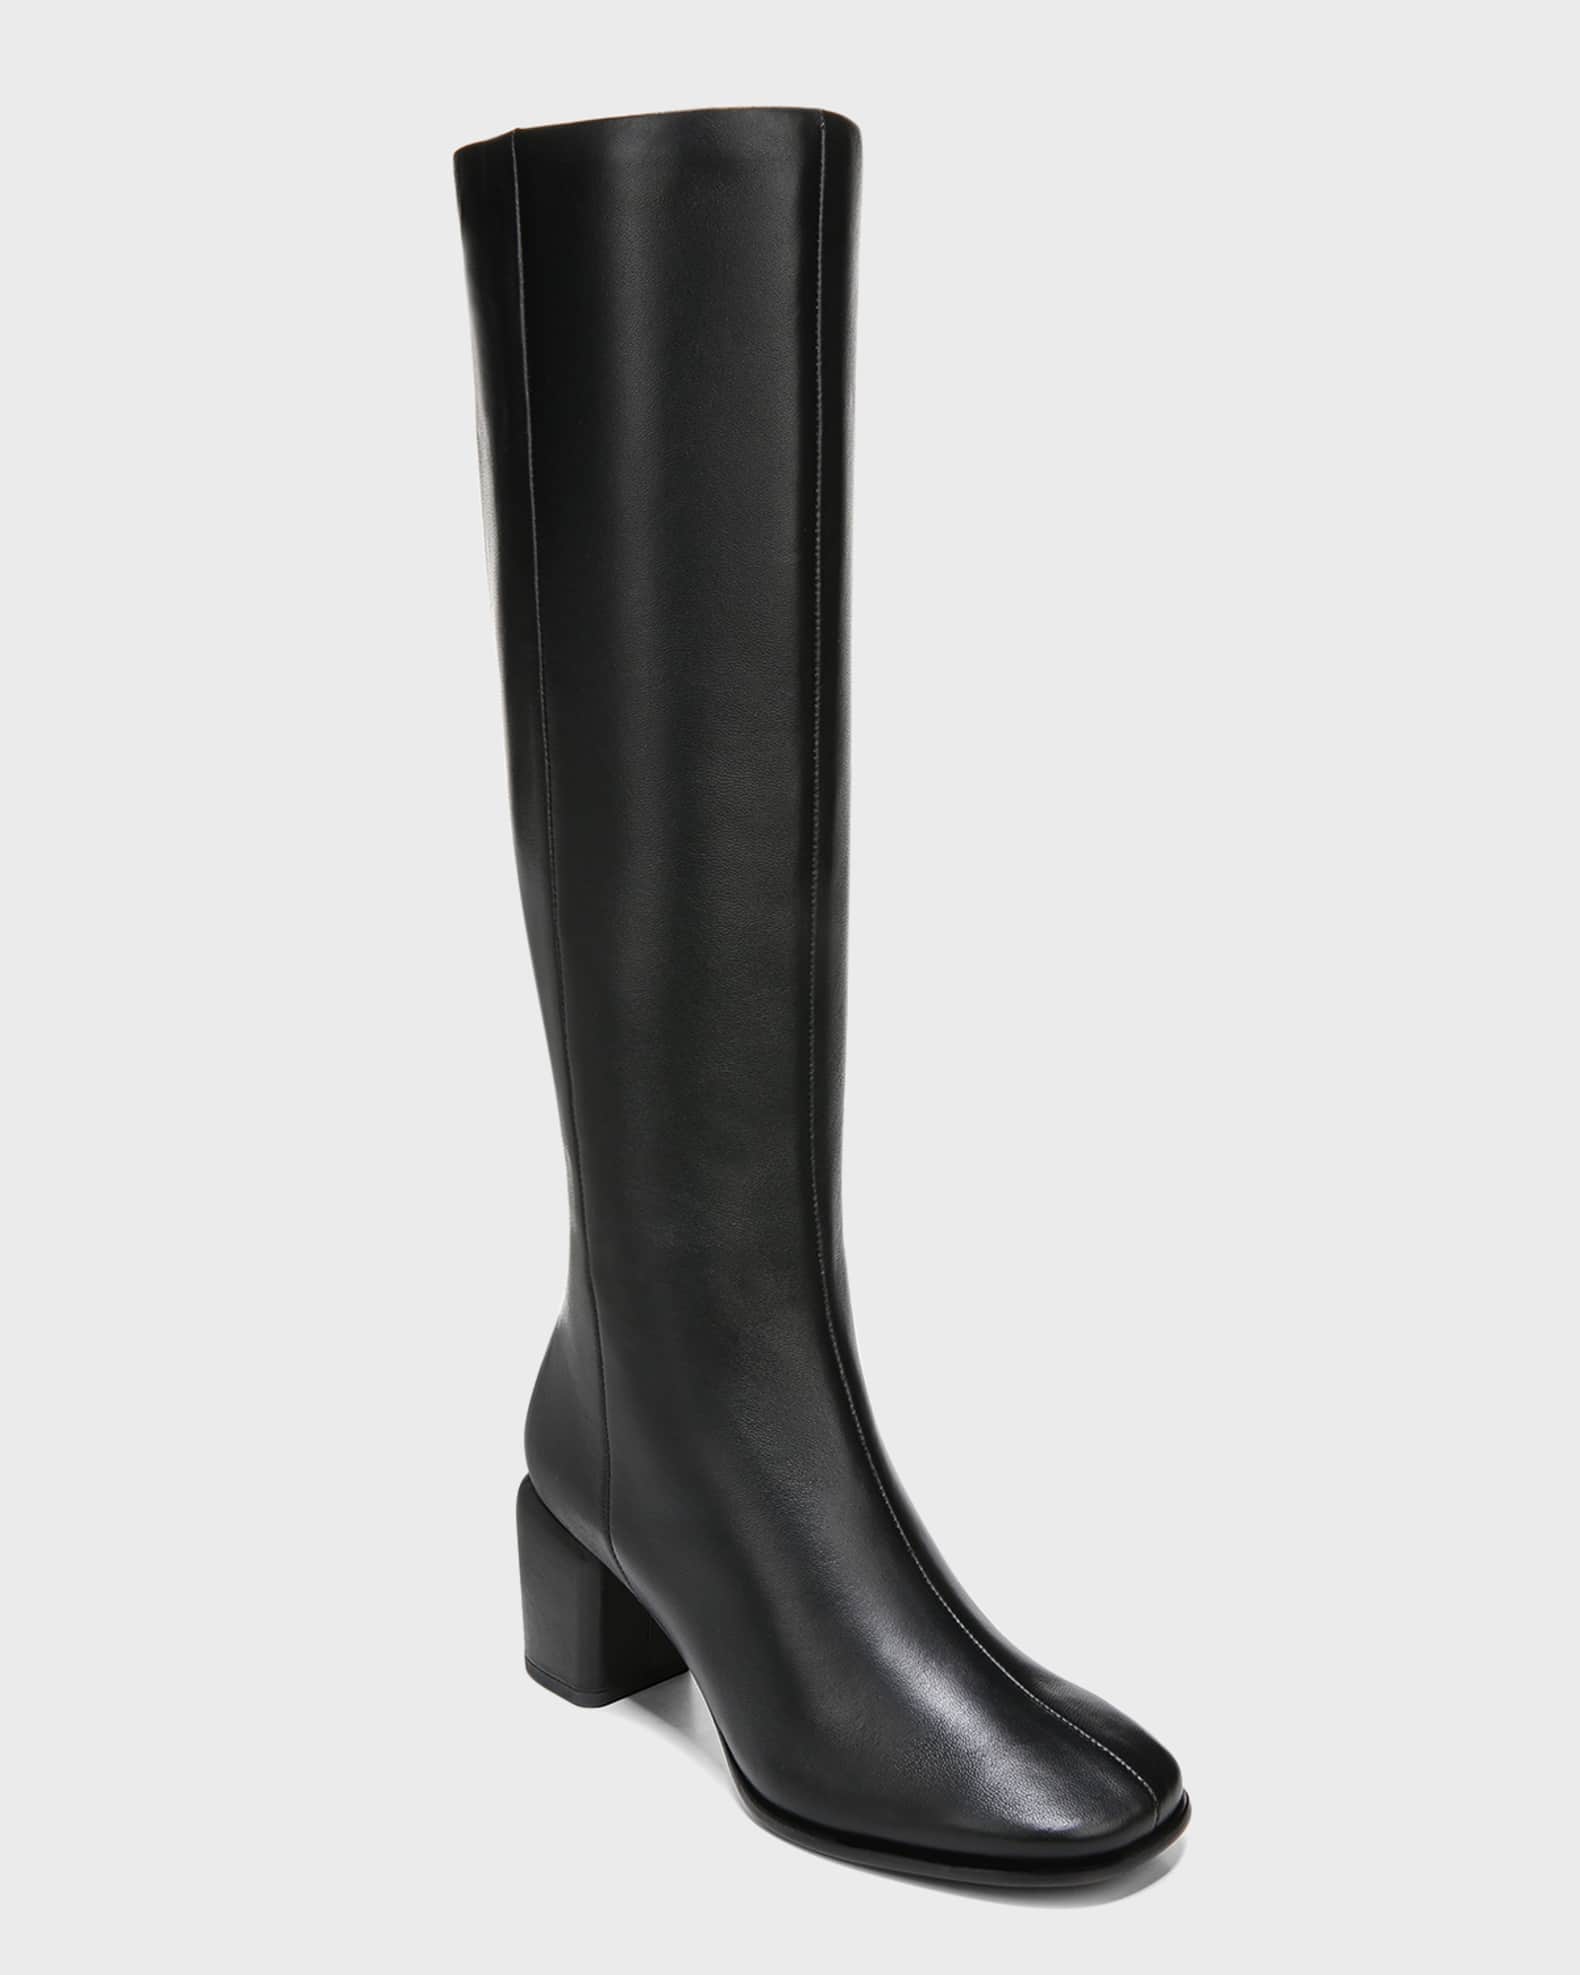 Vince Maggie Tall Wide Calf Knee High Boots | Neiman Marcus